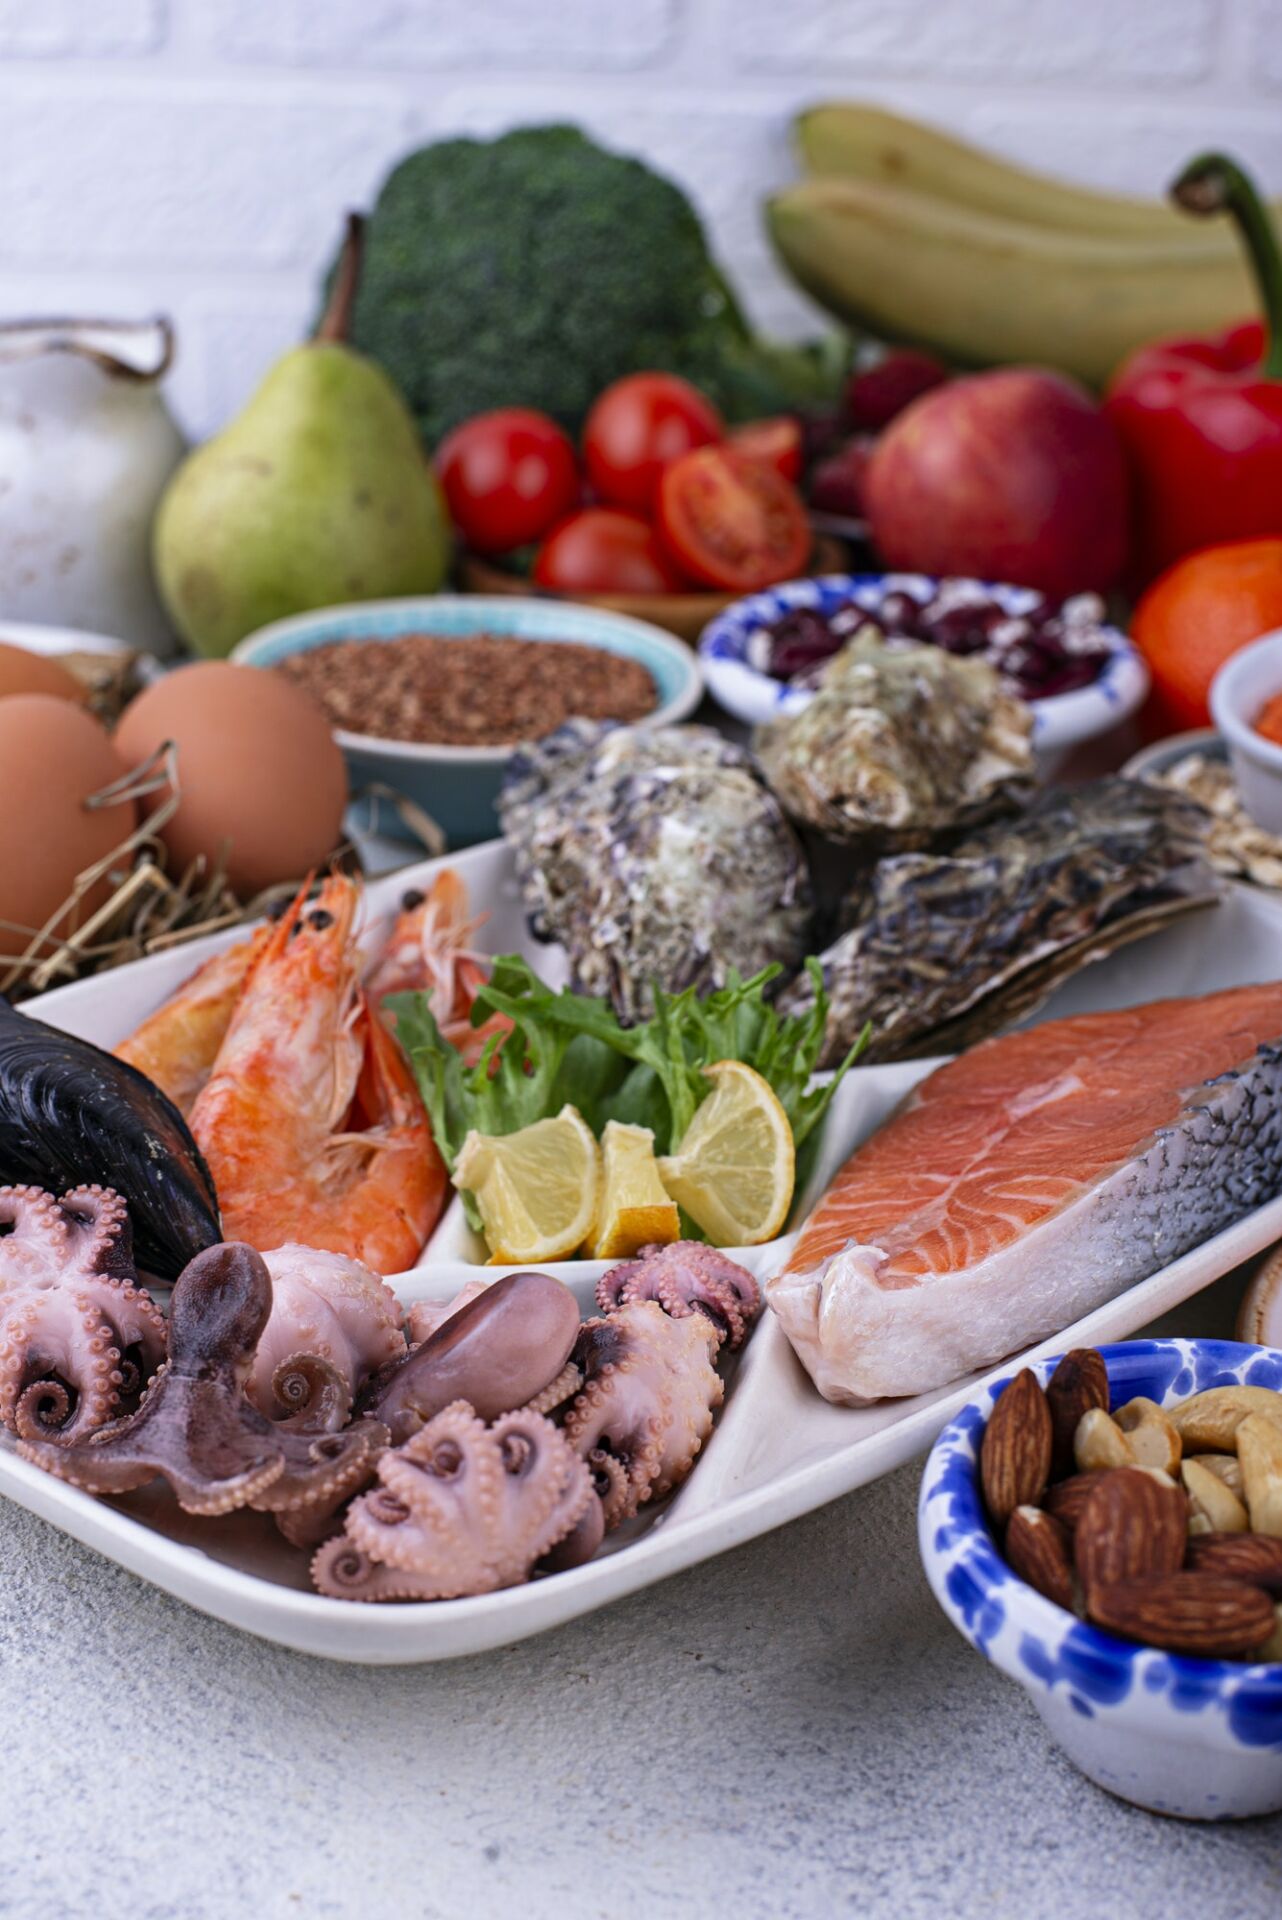 Pescetarian diet with seafood, fruit and vegetables